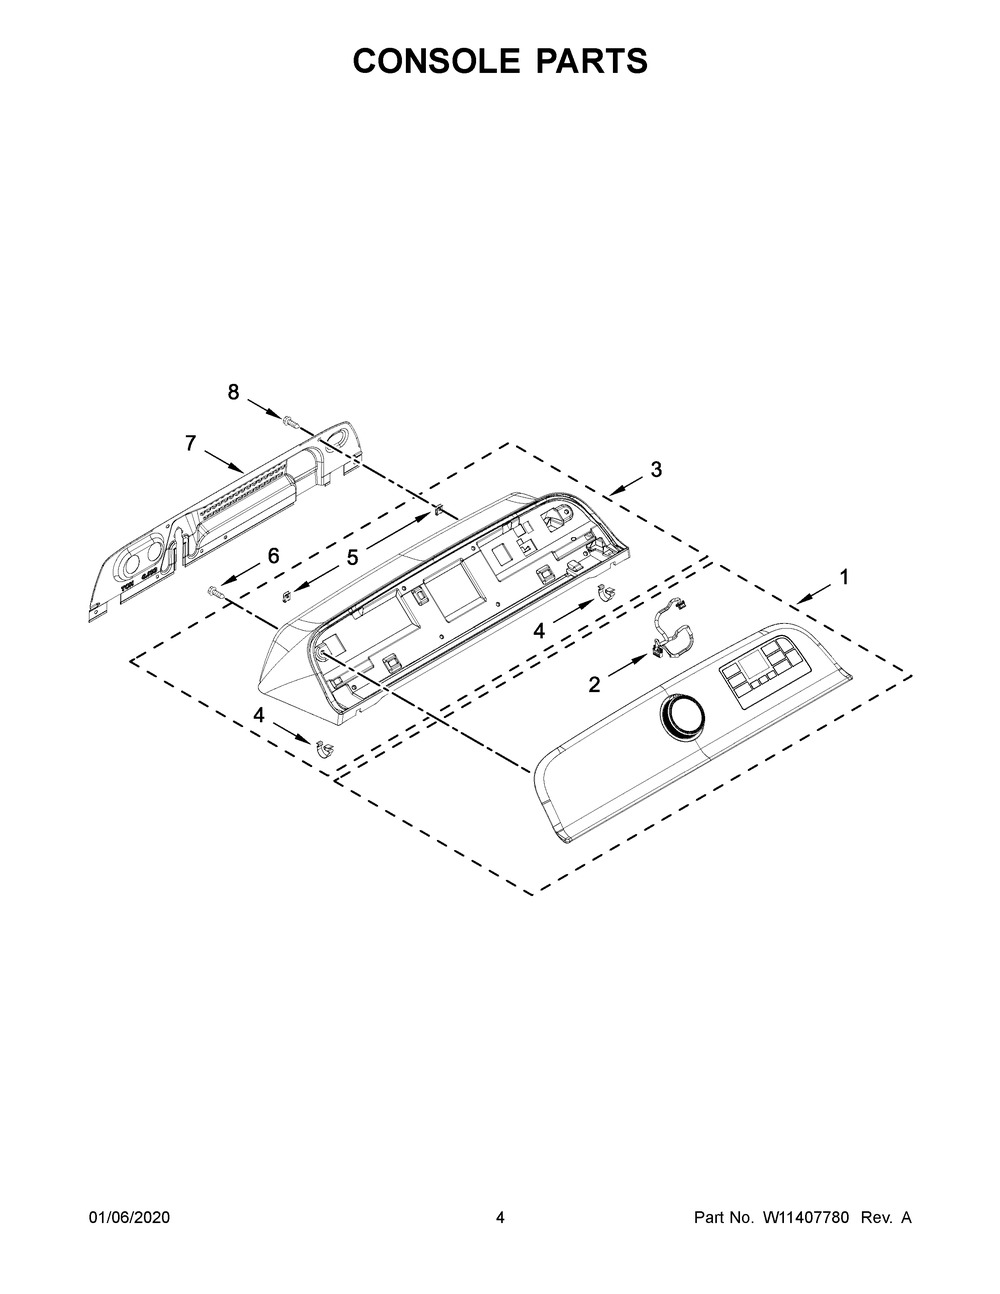 Part Location Diagram of W11596129 Whirlpool HARNS-WIRE